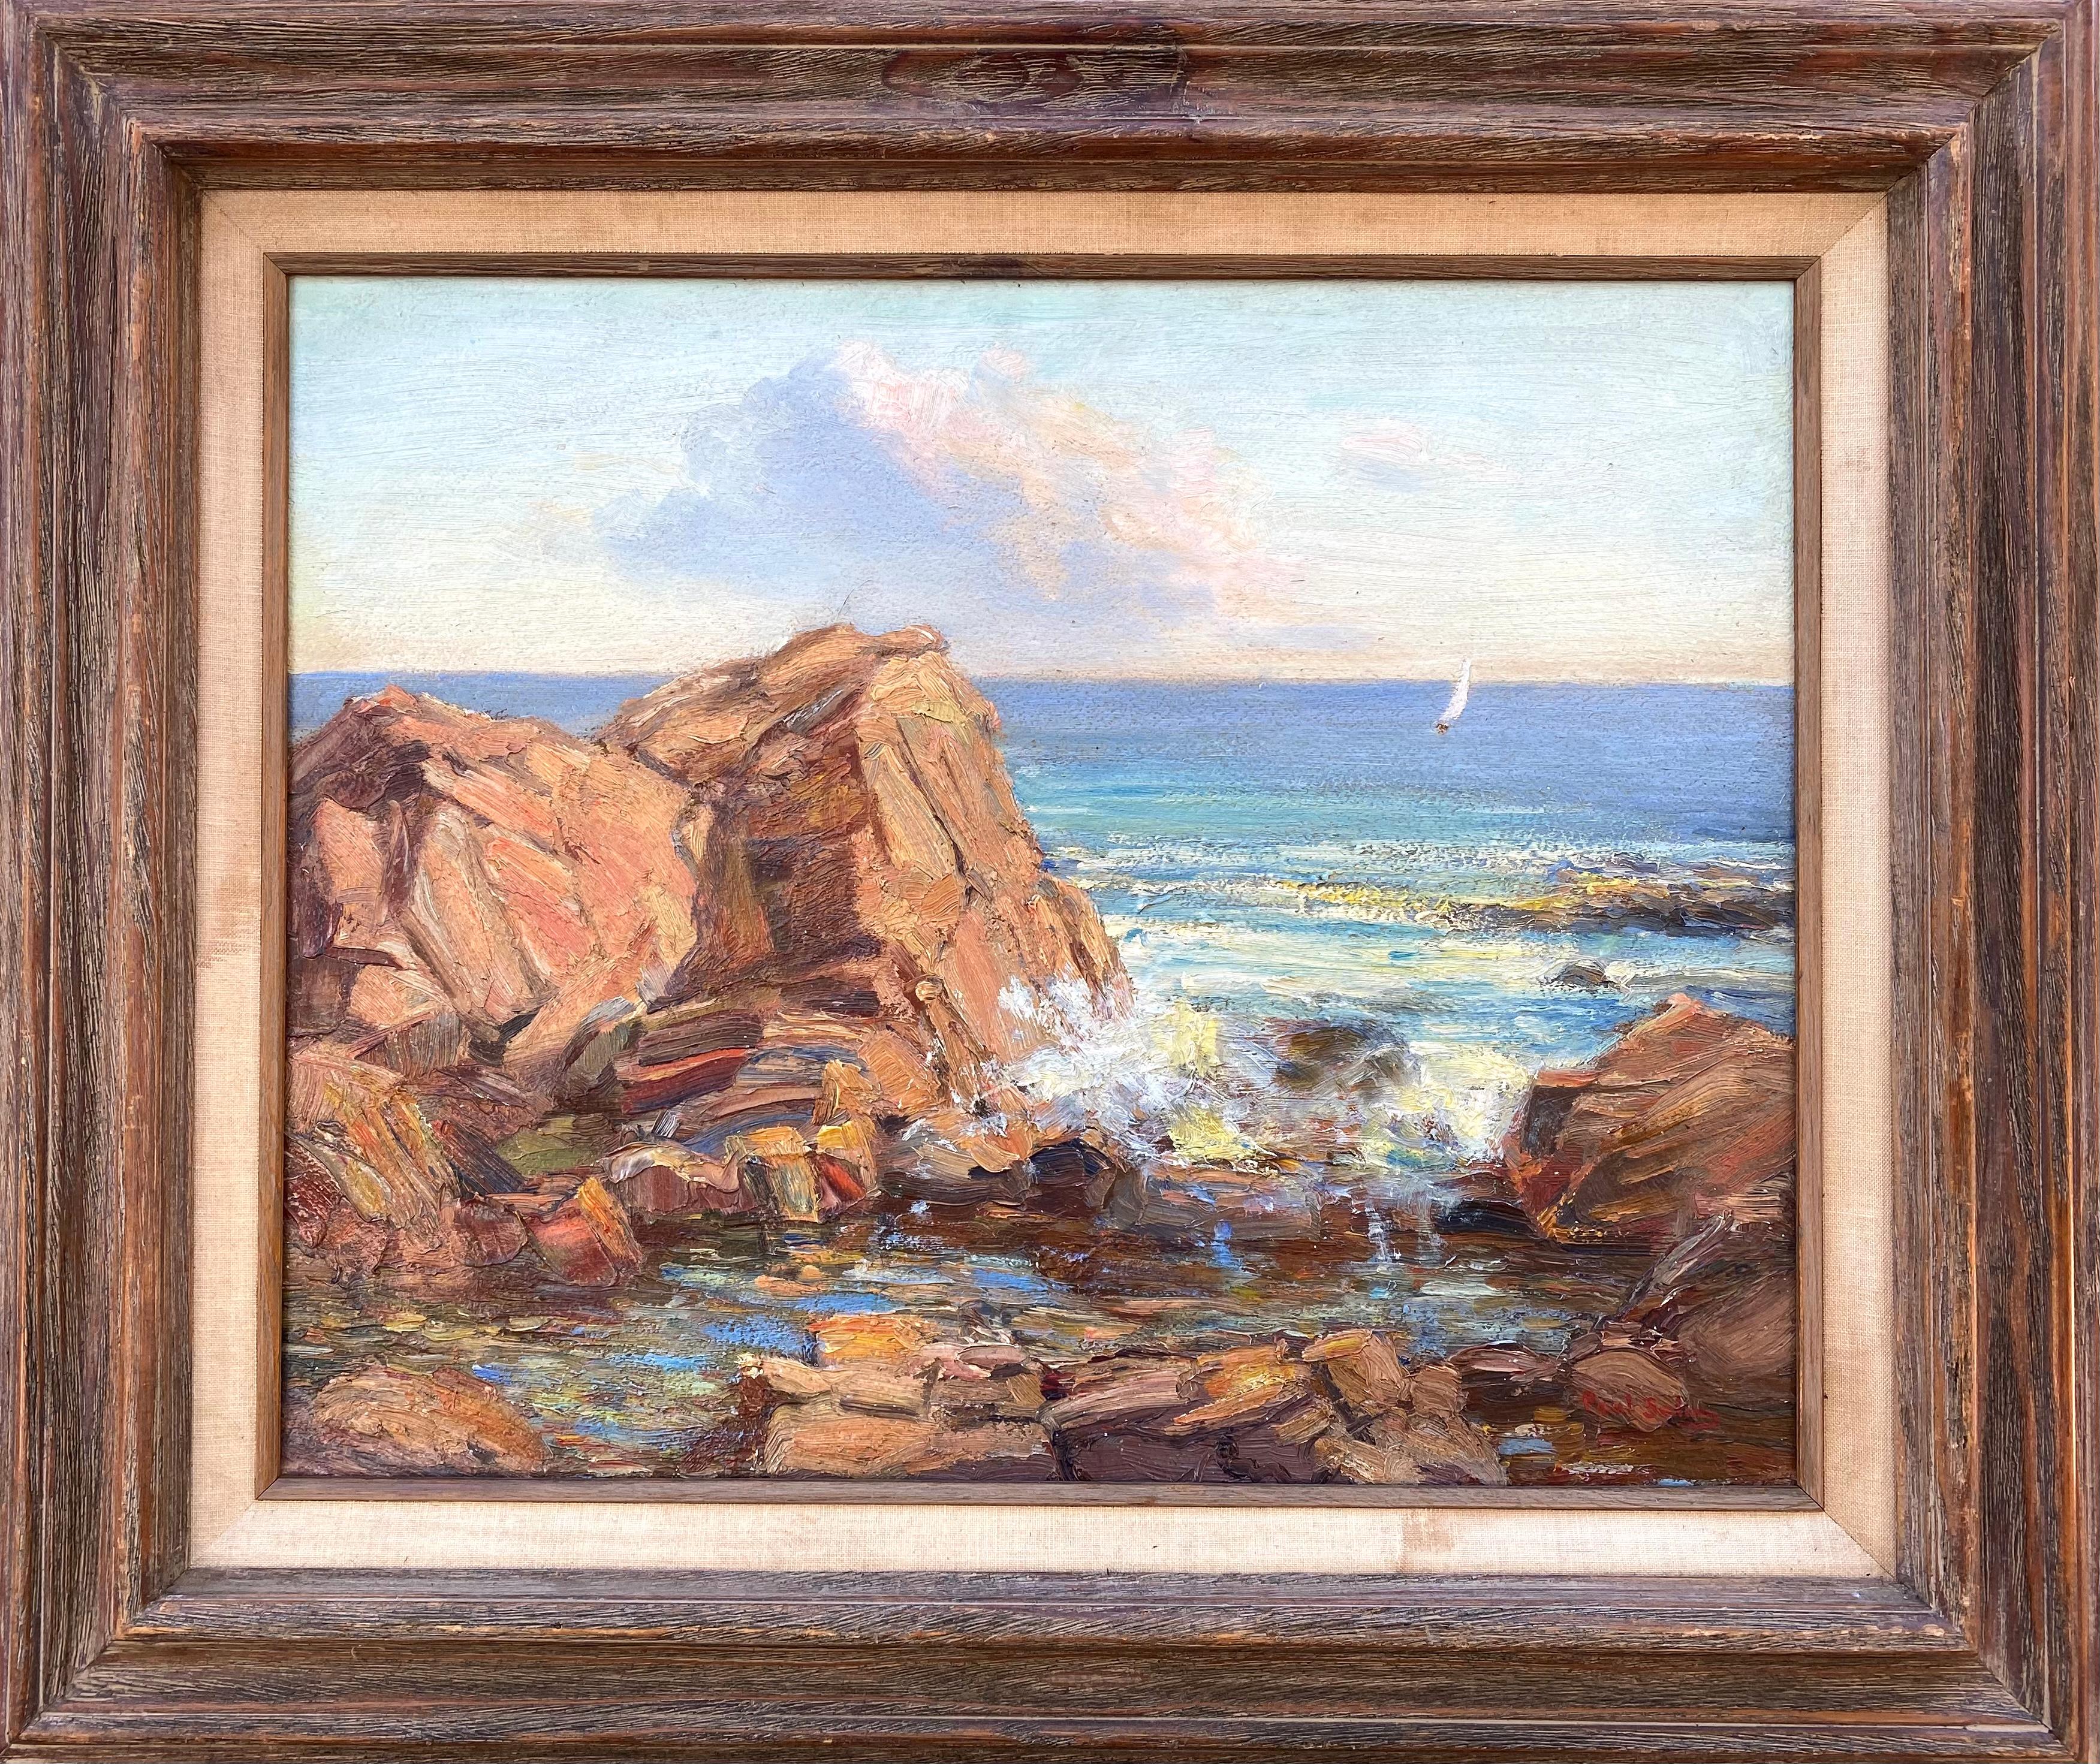 “Sailing off the Rocky Coast” - Painting by Paul E. Saling